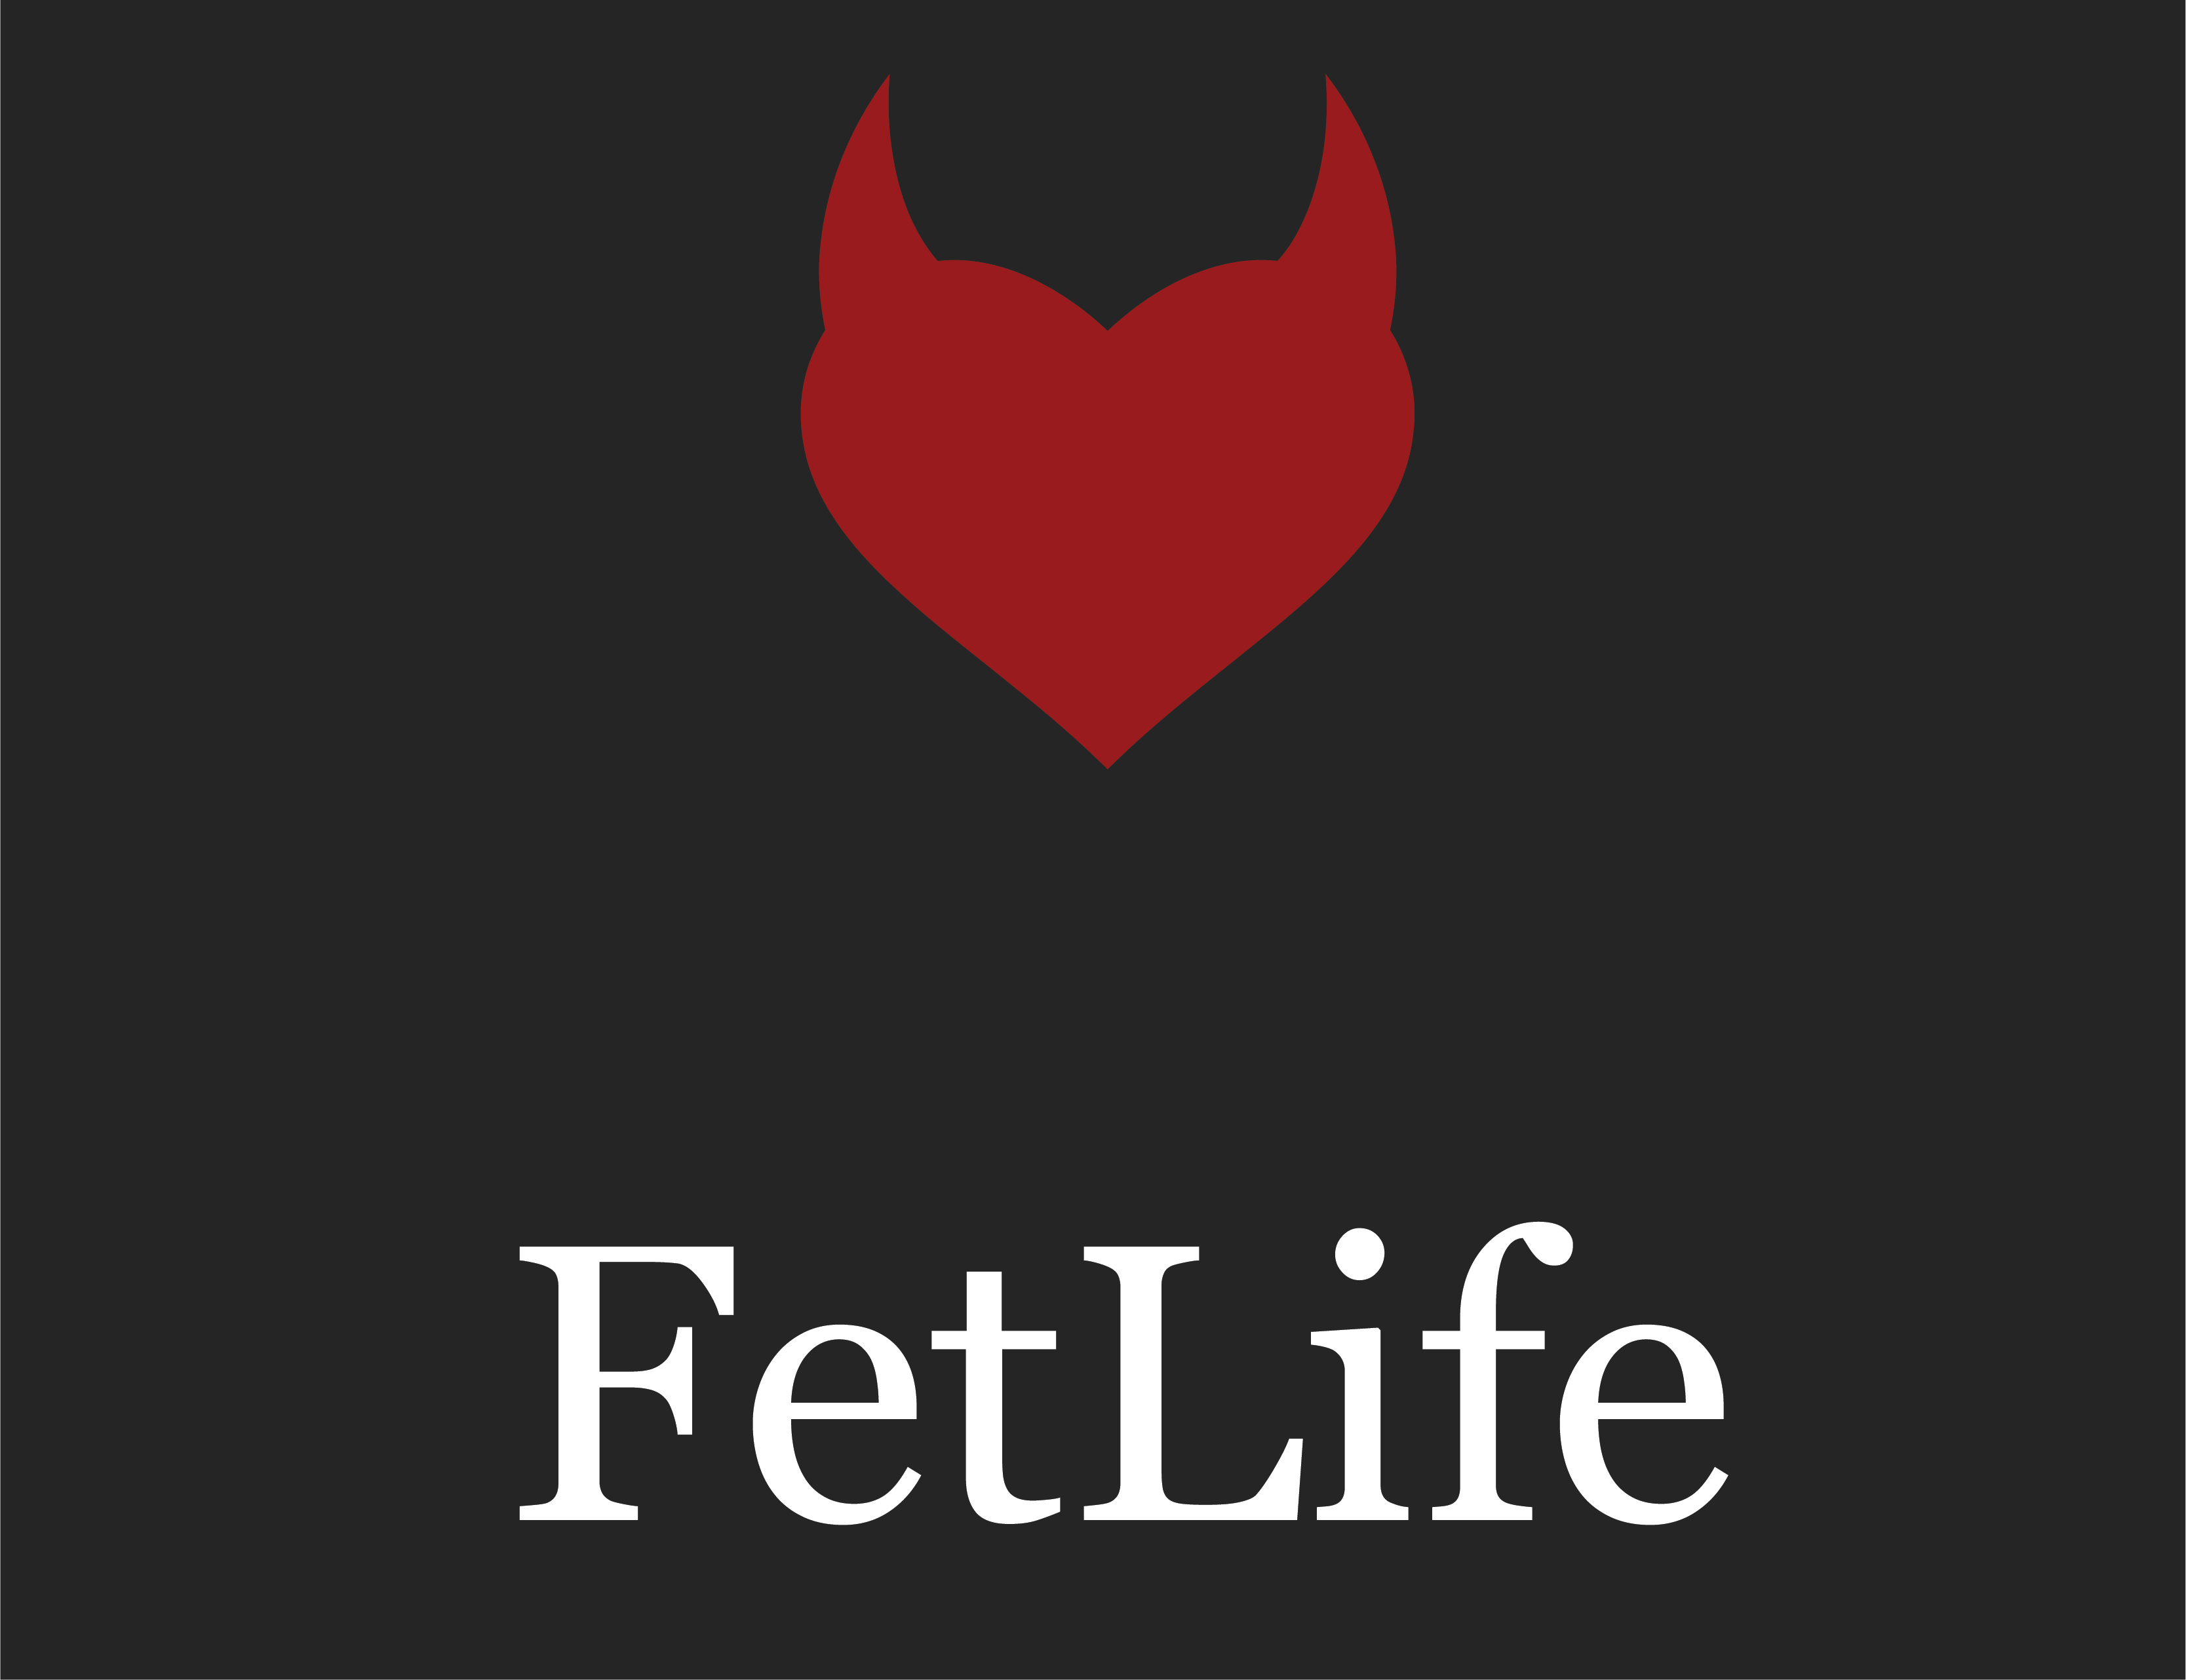 Is the FetLife app good? - DatingScout